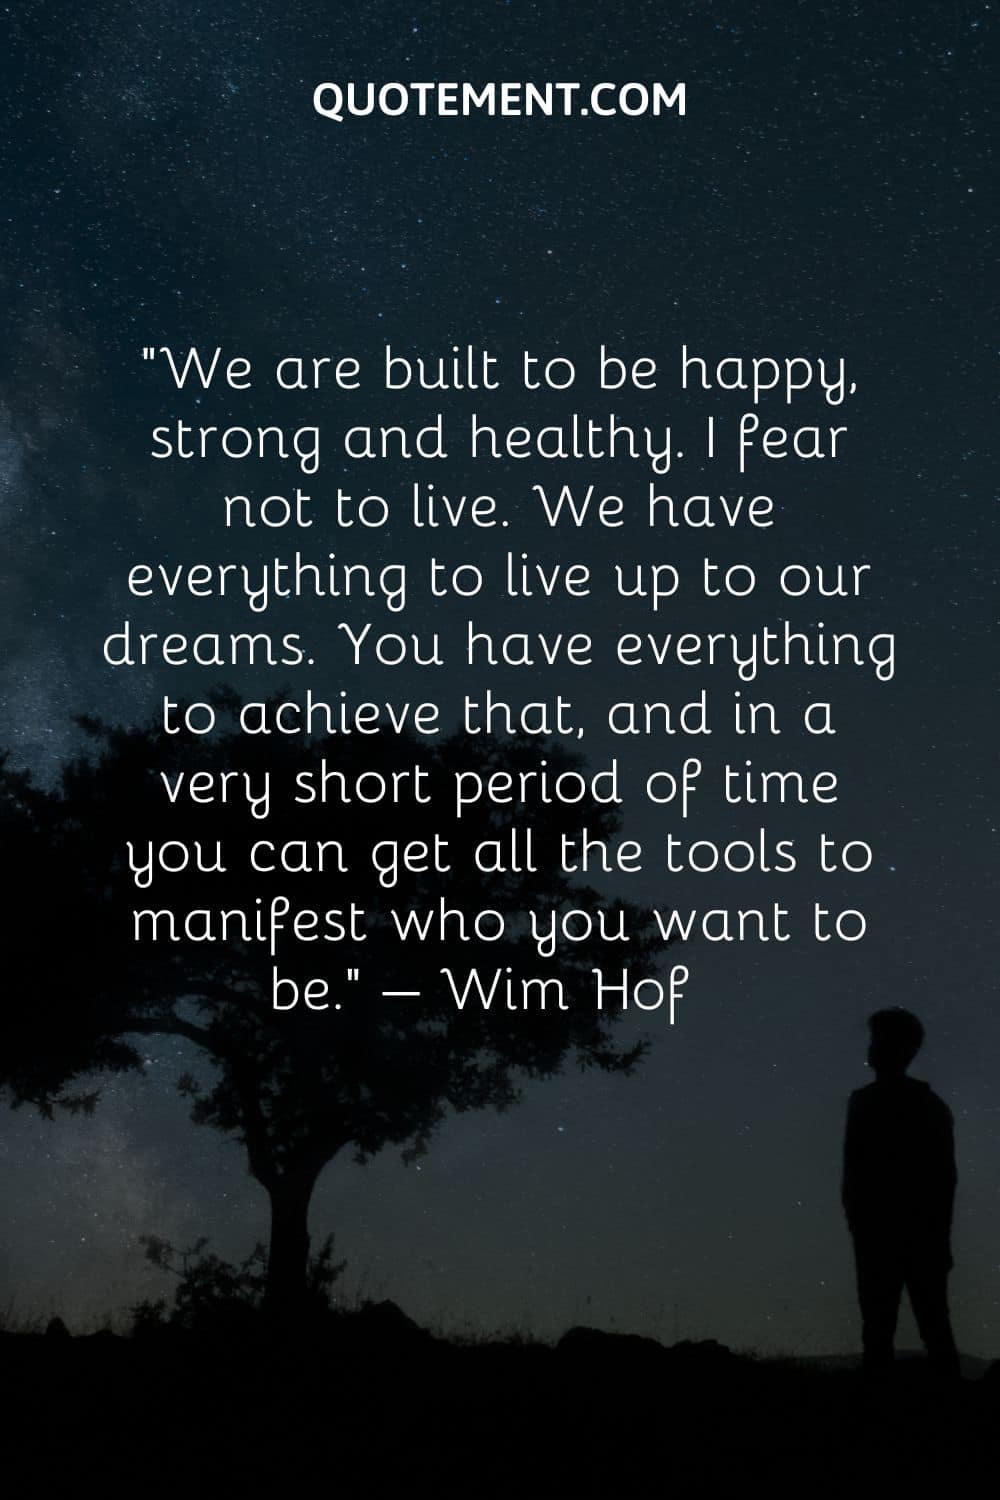 We are built to be happy, strong and healthy